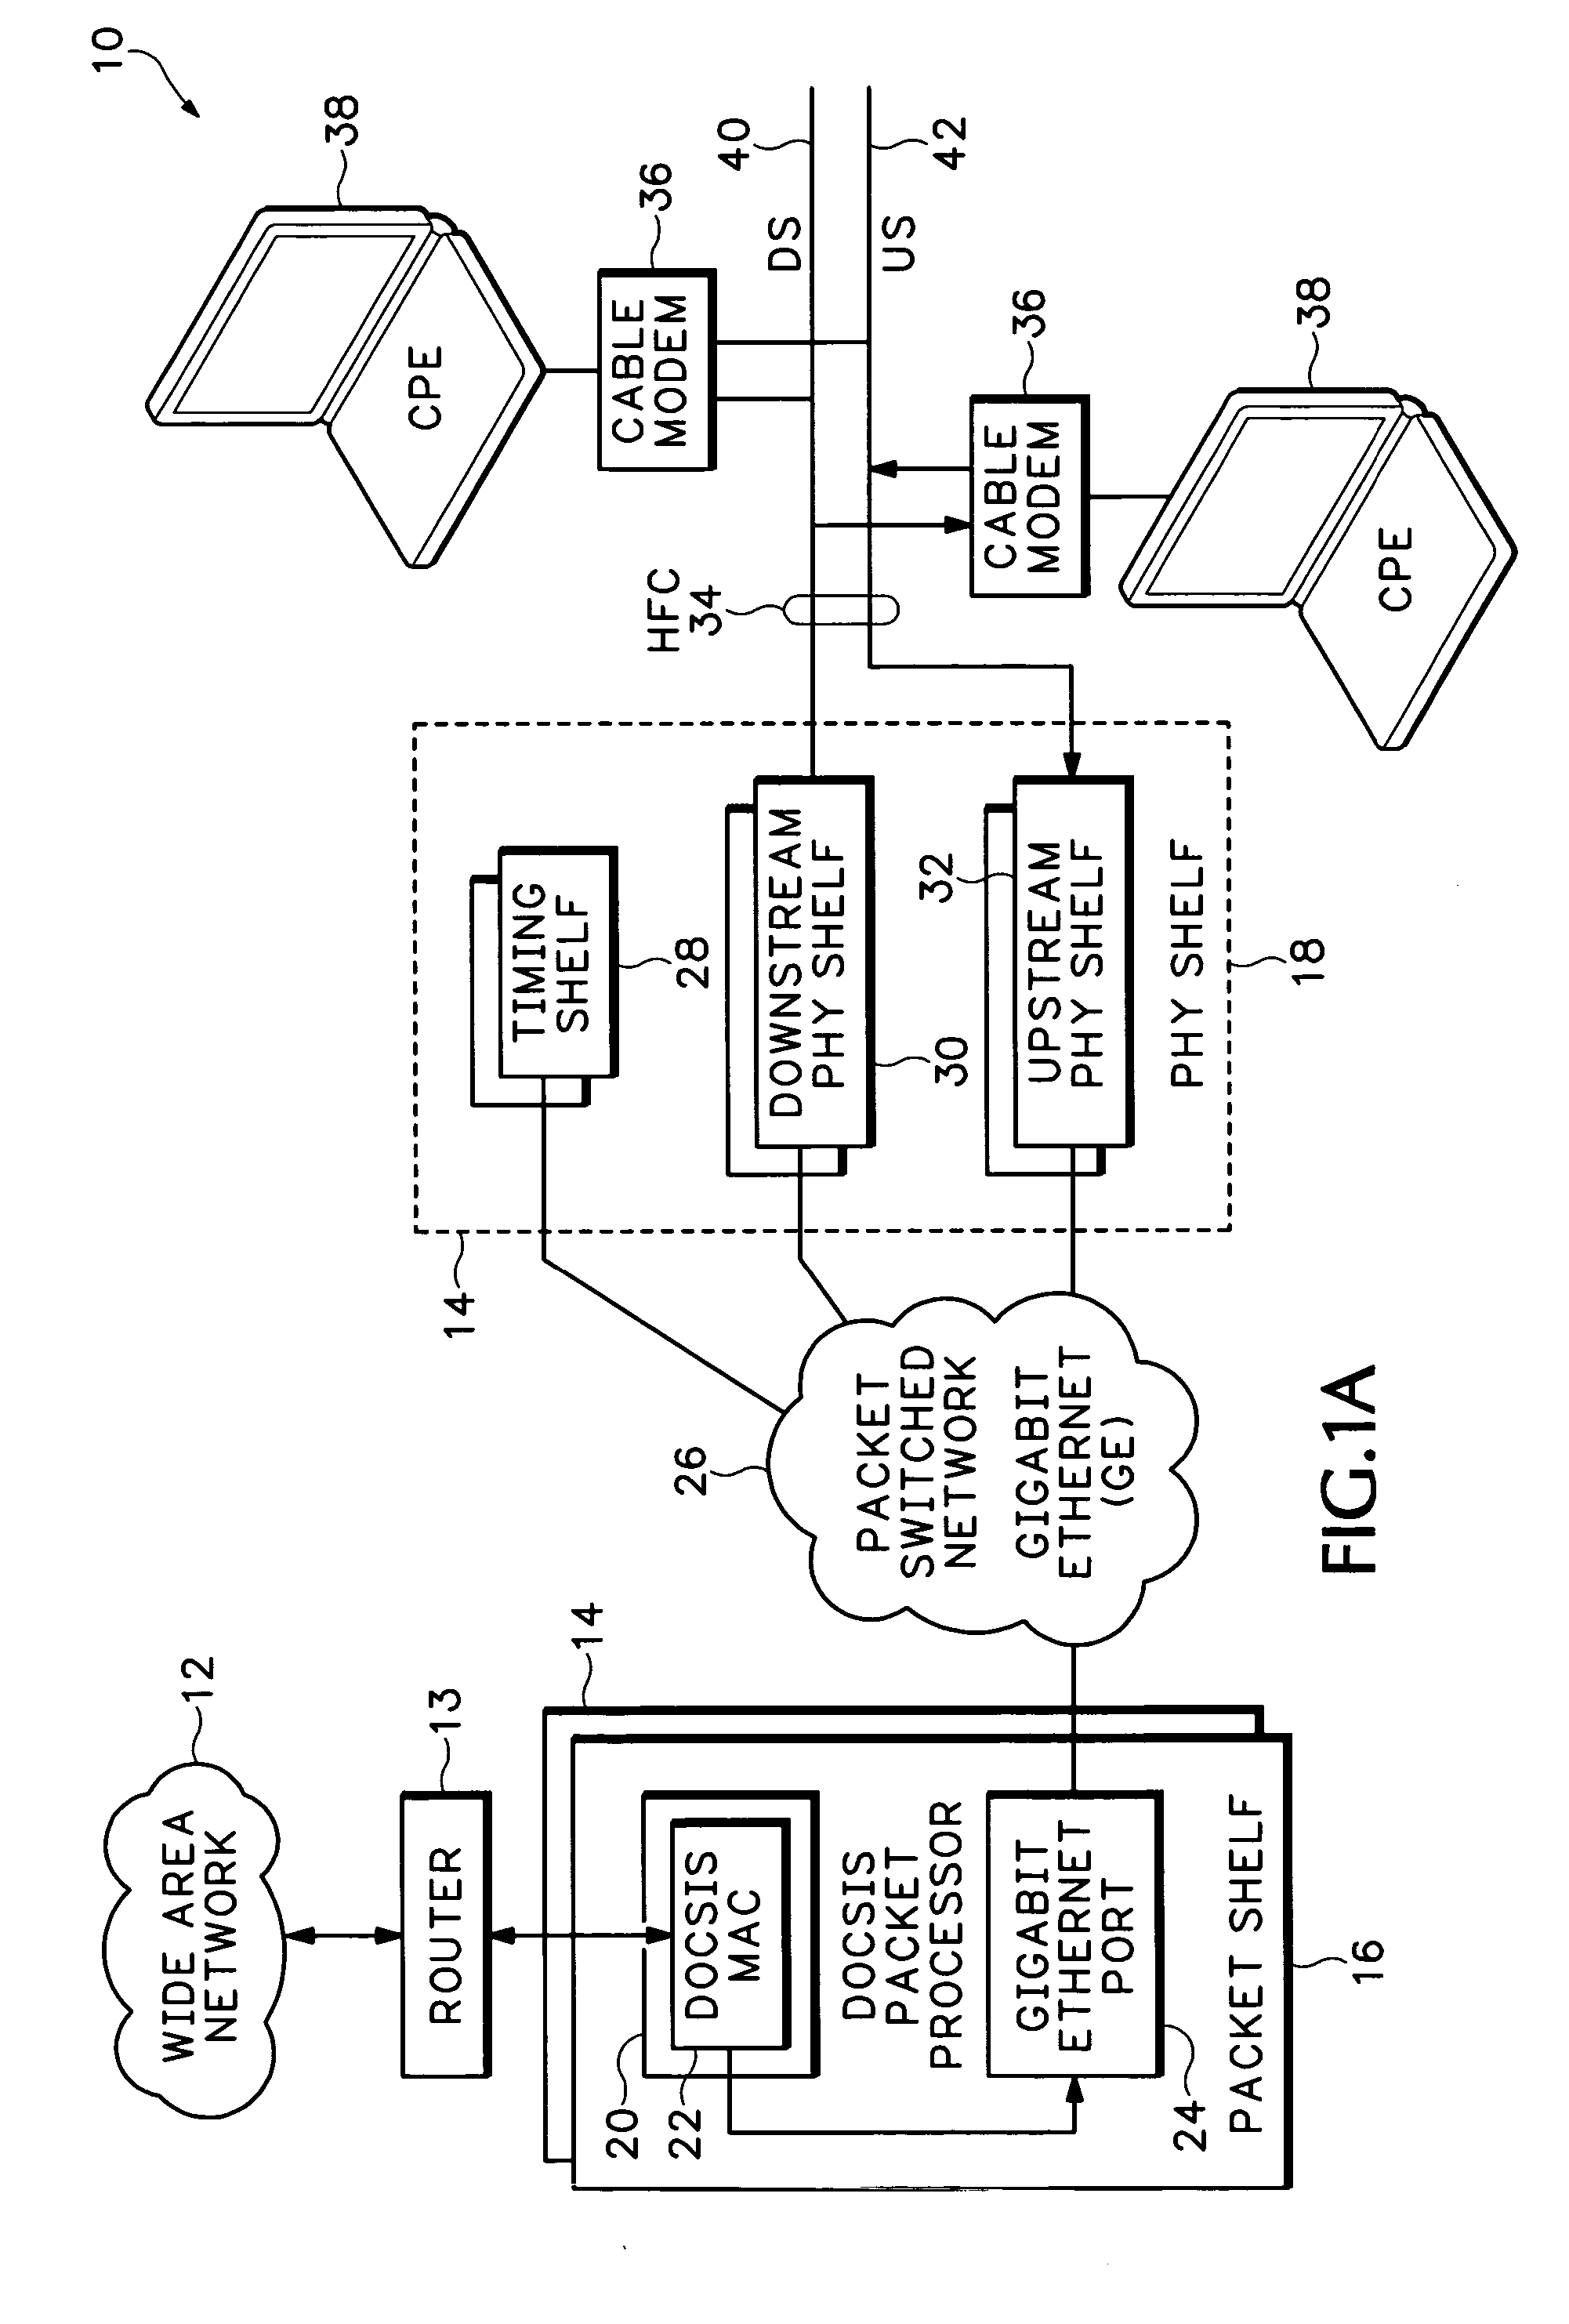 Downstream remote physical interface for modular cable modem termination system